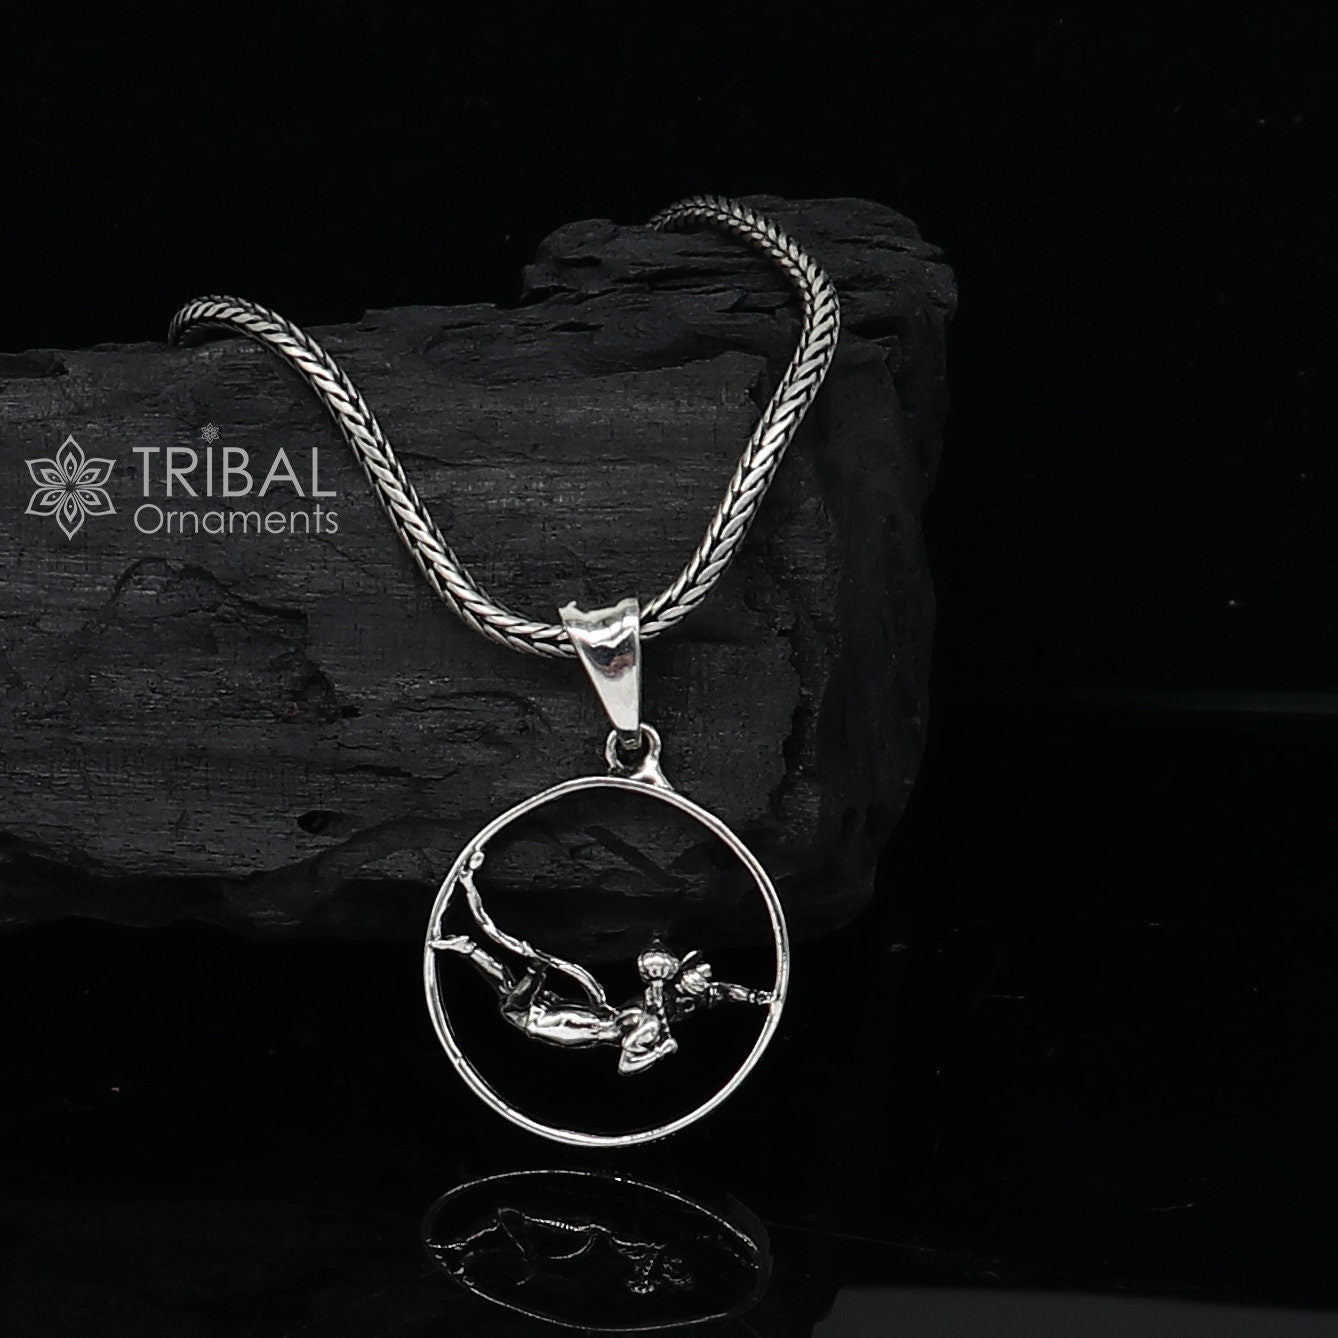 925 pure silver LORD HANUMAN pendant best gifting pendant, wheat chain necklace locket best gifting delicate unisex  jewelry nsp742 - TRIBAL ORNAMENTS